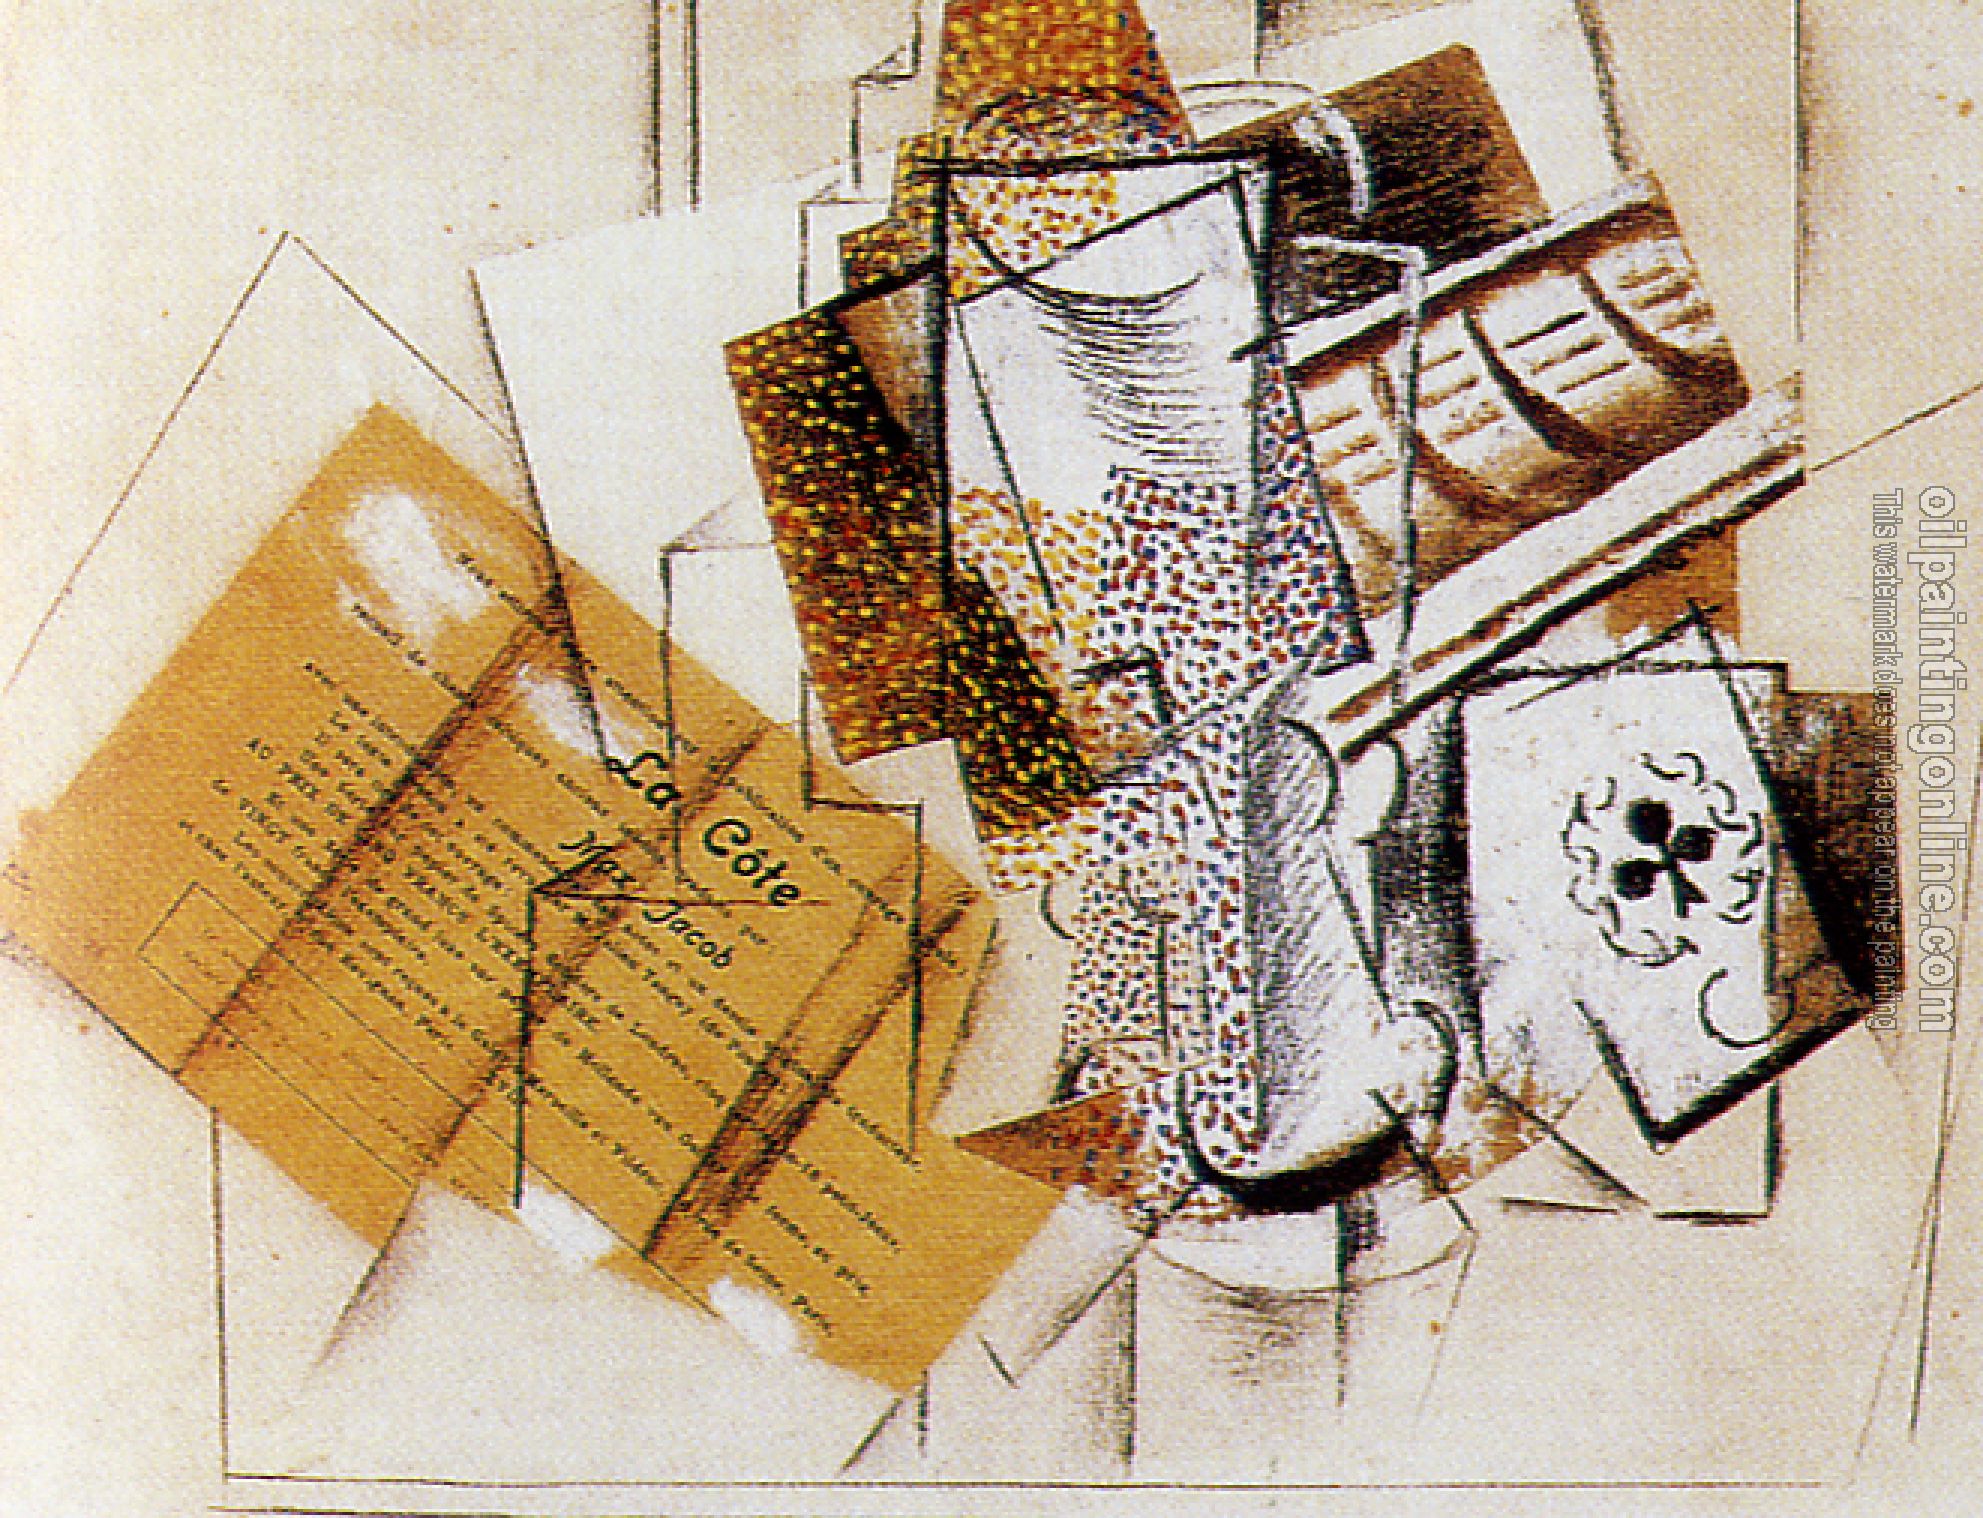 Picasso, Pablo - still life with glass and card game